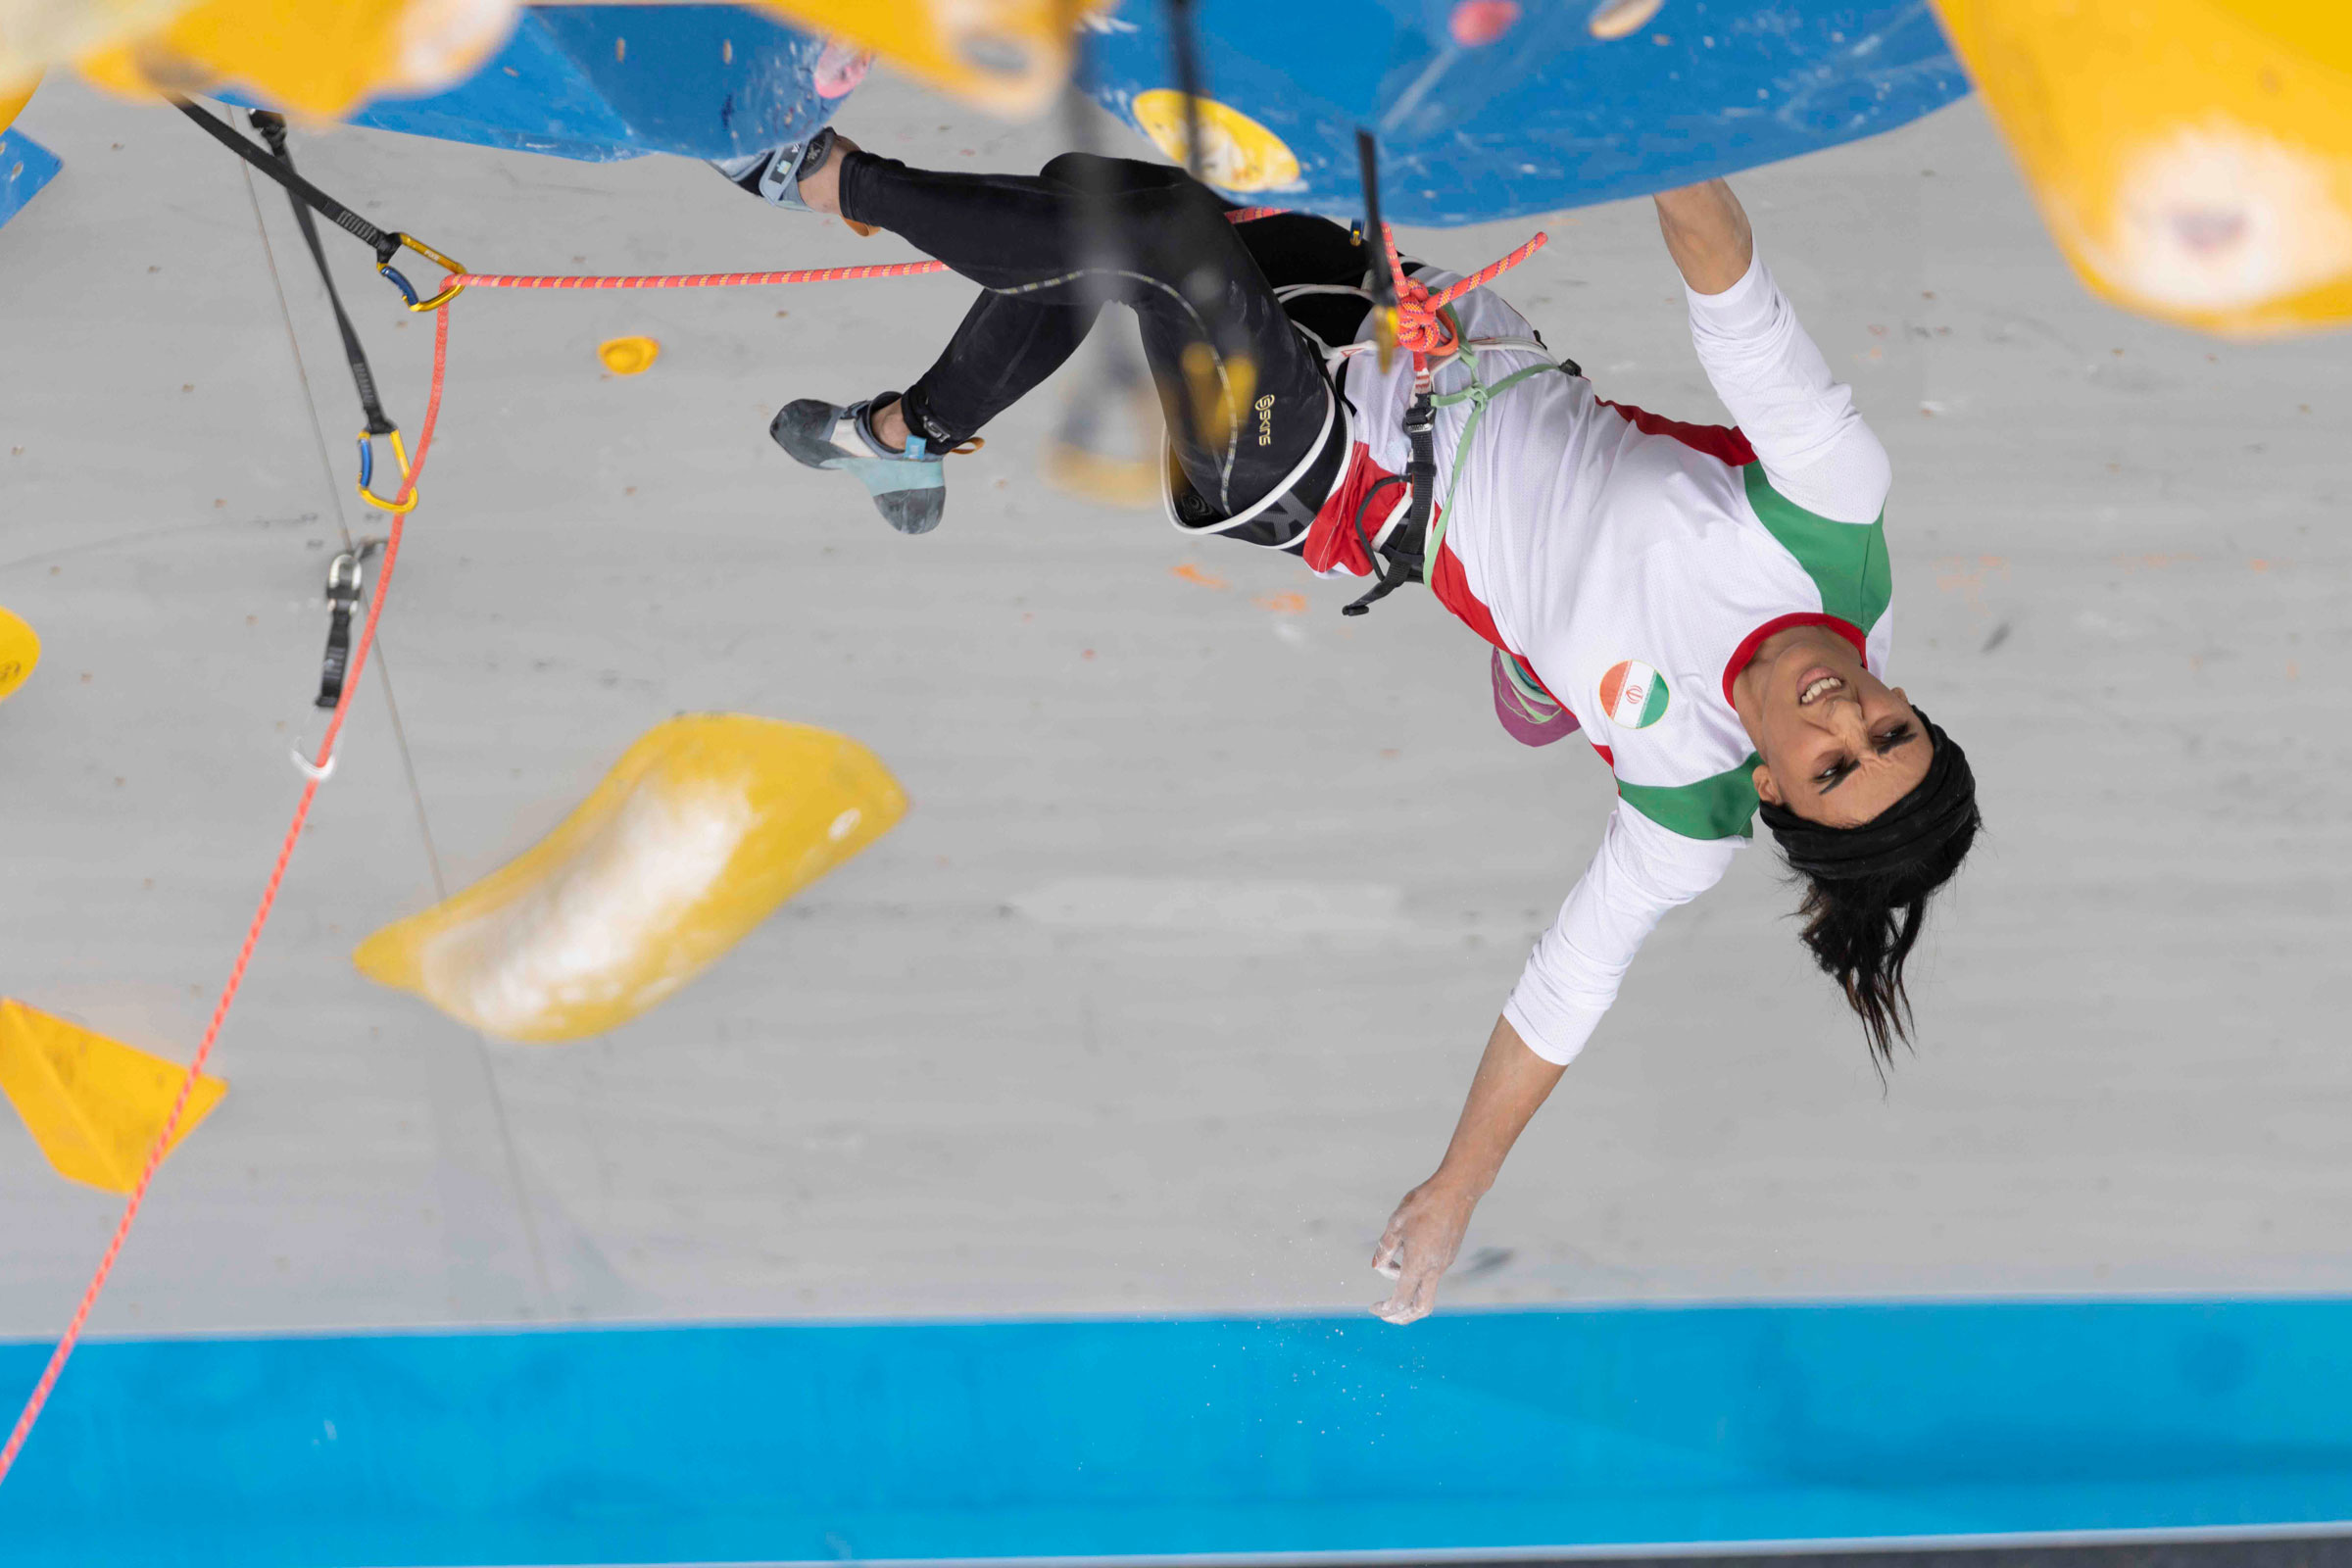 Iranian athlete Elnaz Rekabi competes during the women's Boulder &amp; Lead final during the IFSC Climbing Asian Championships, in Seoul, on Oct. 16, 2022. (Rhea Khang—International Federation of Sport Climbing/AP)